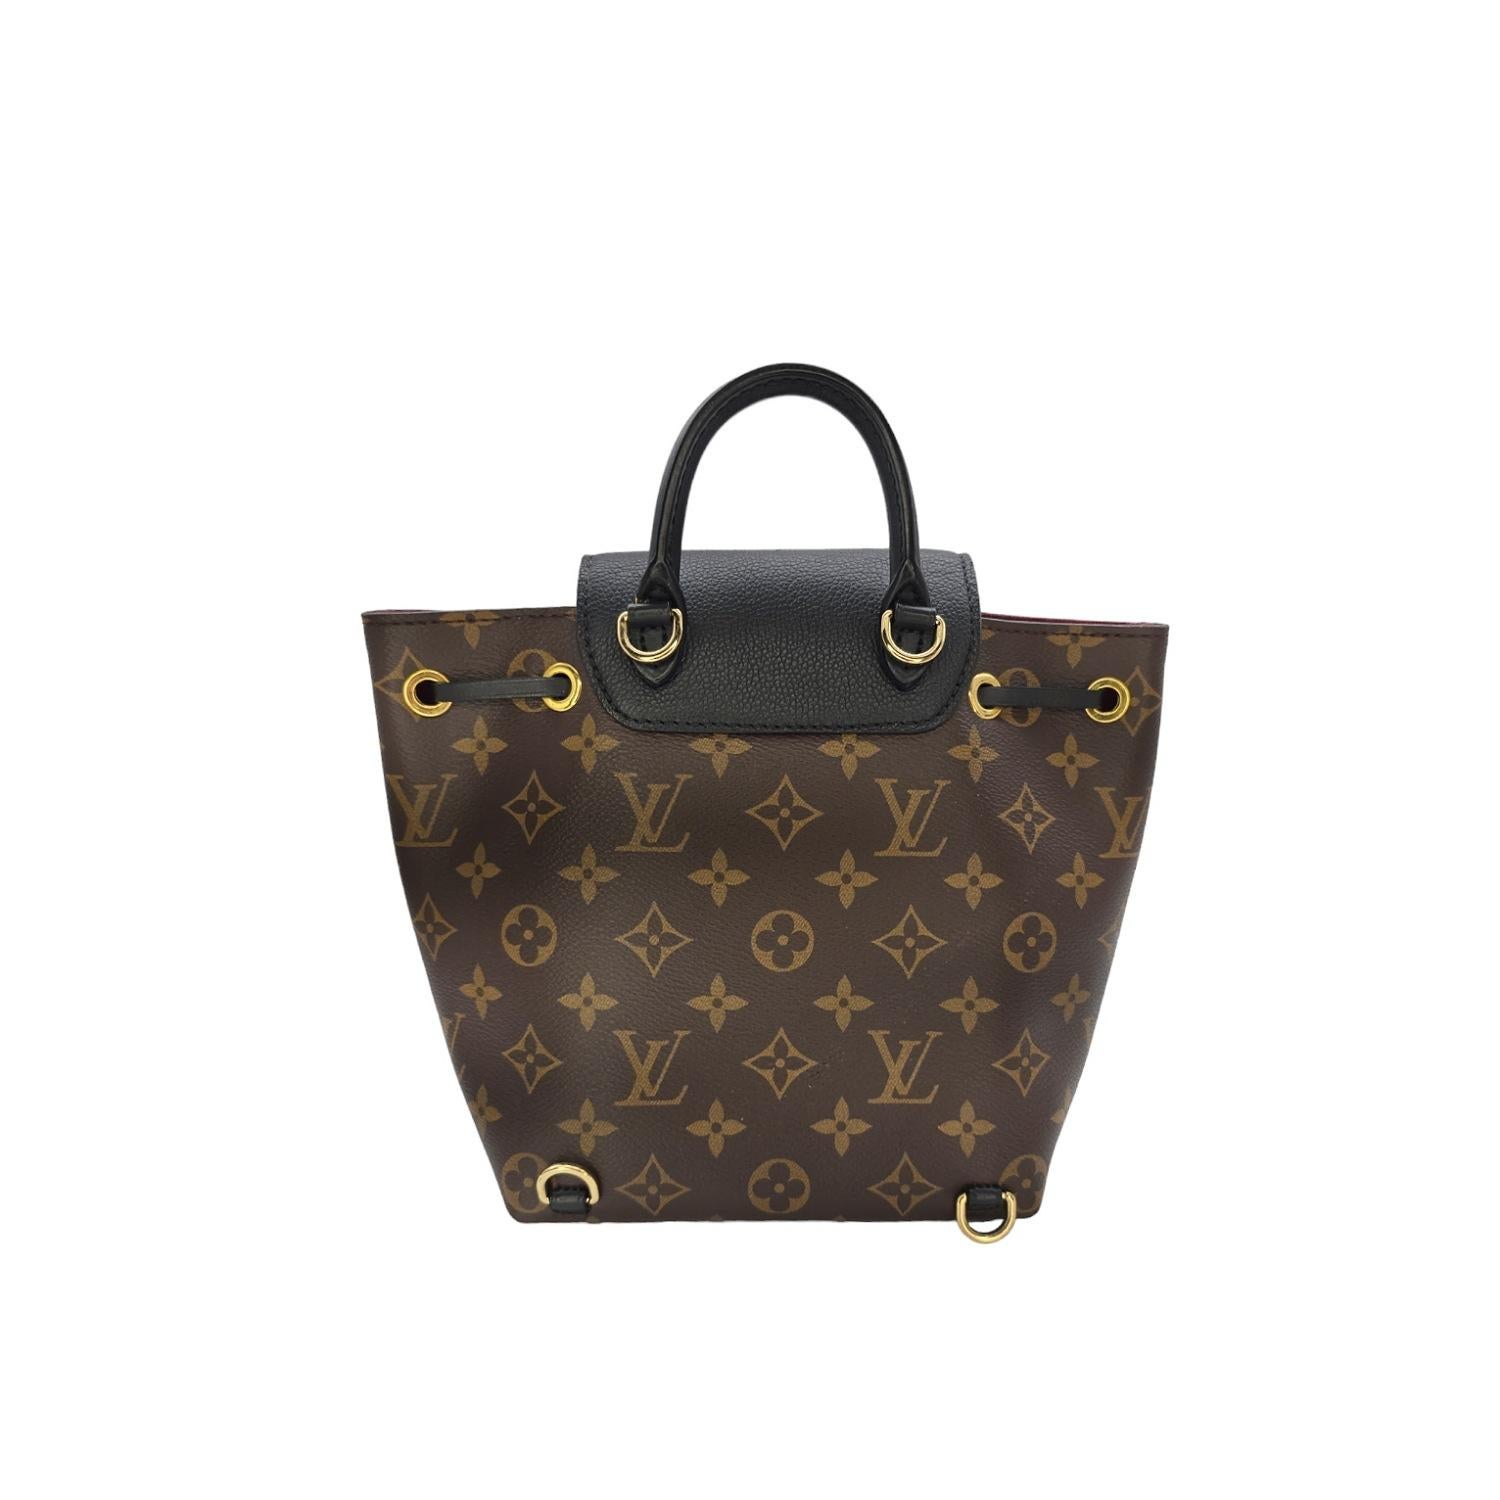 Elevate your accessories game with the Louis Vuitton Monogram BB Montsouris Backpack. Crafted from the iconic monogrammed coated canvas and luxurious black leather trim, this backpack exudes sophistication. The adjustable shoulder straps and